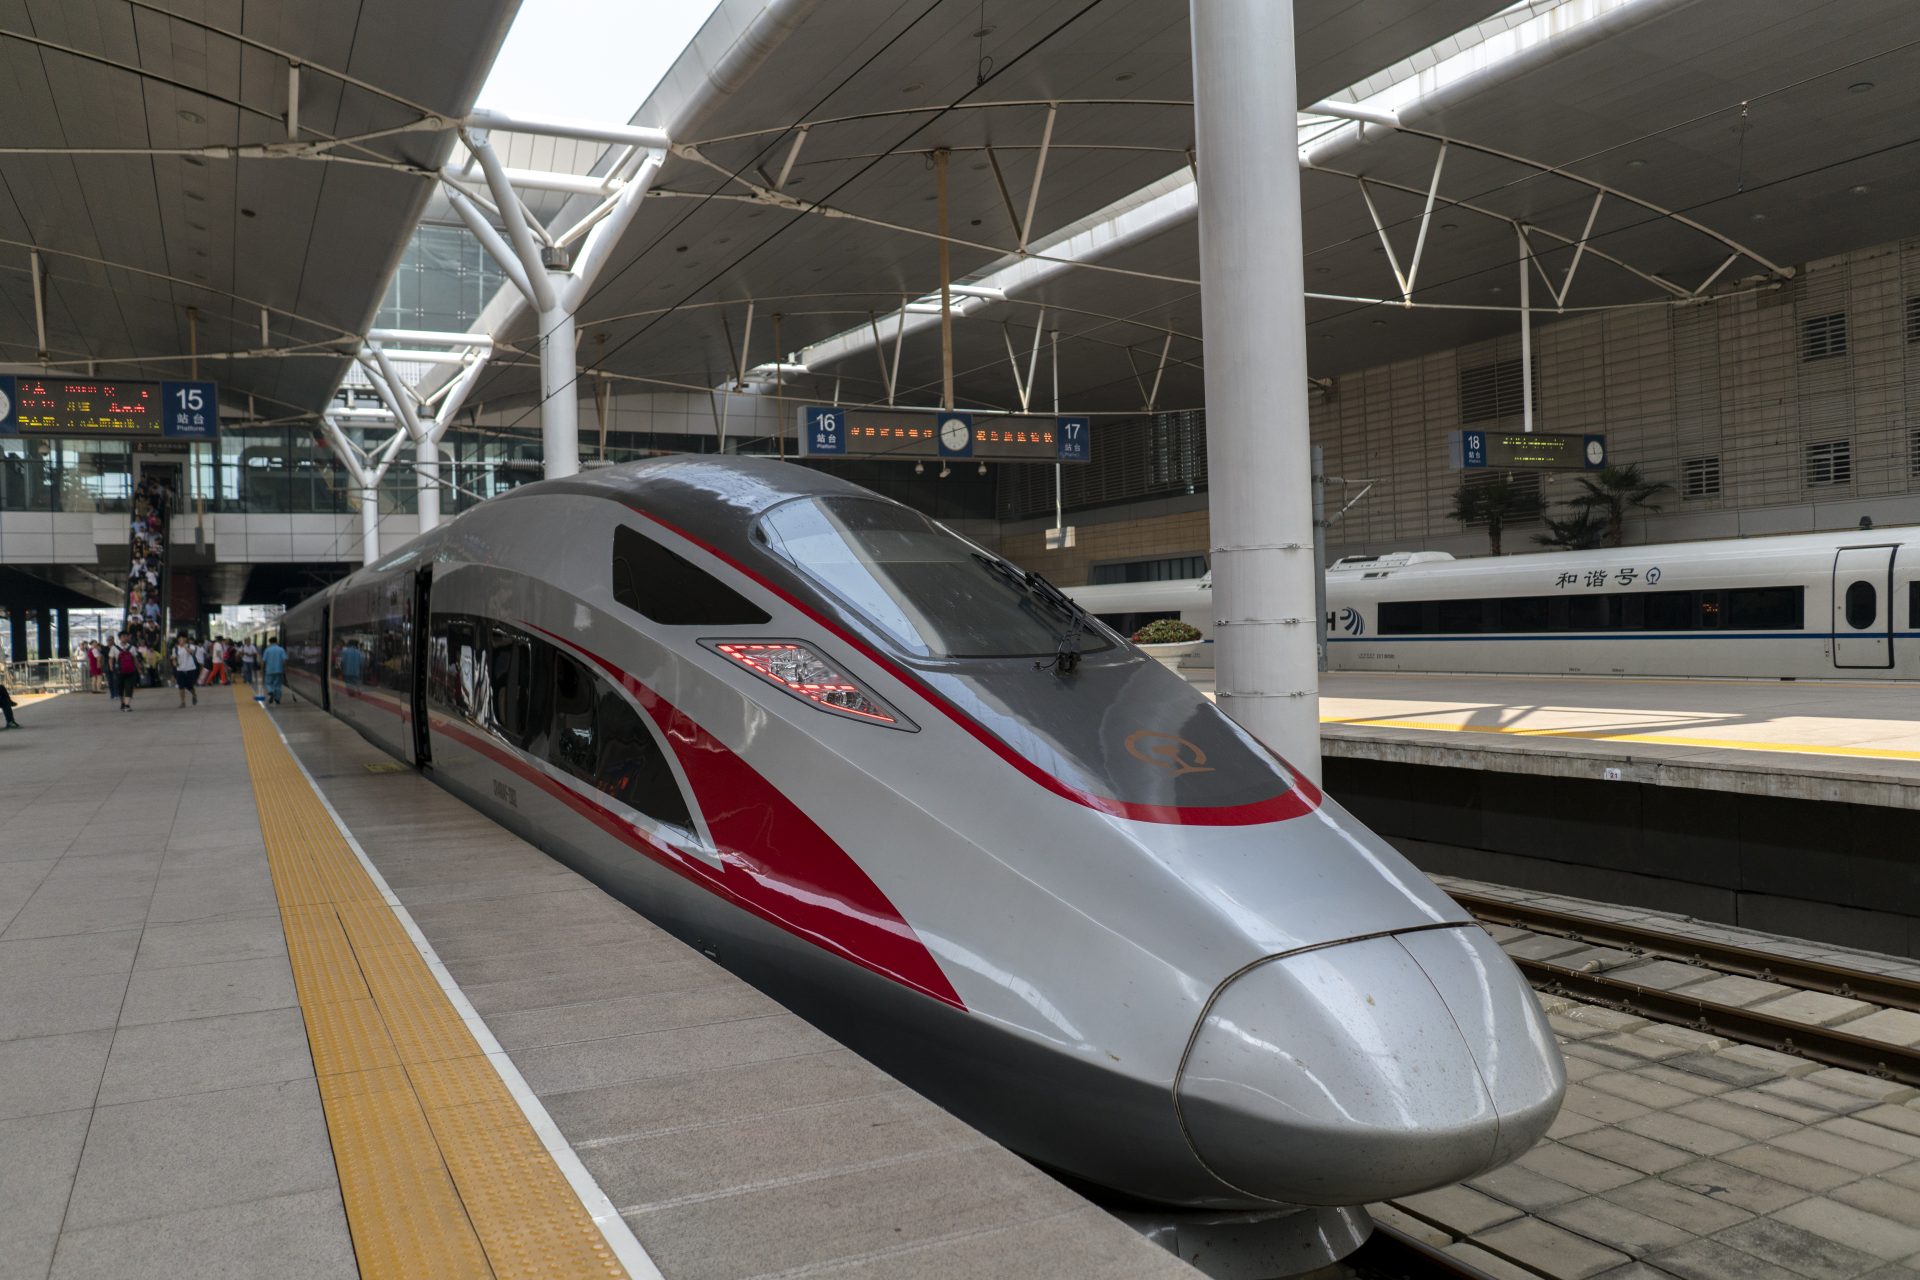 <p><span>The CR400 "Fuxing" trains run at a commercial maximum of 350 km per hour (217 mph) and have even reached test speeds of 420 km (260 mph) per hour! The trains were developed based on technology used in high-speed trains in Europe and Japan.</span></p>